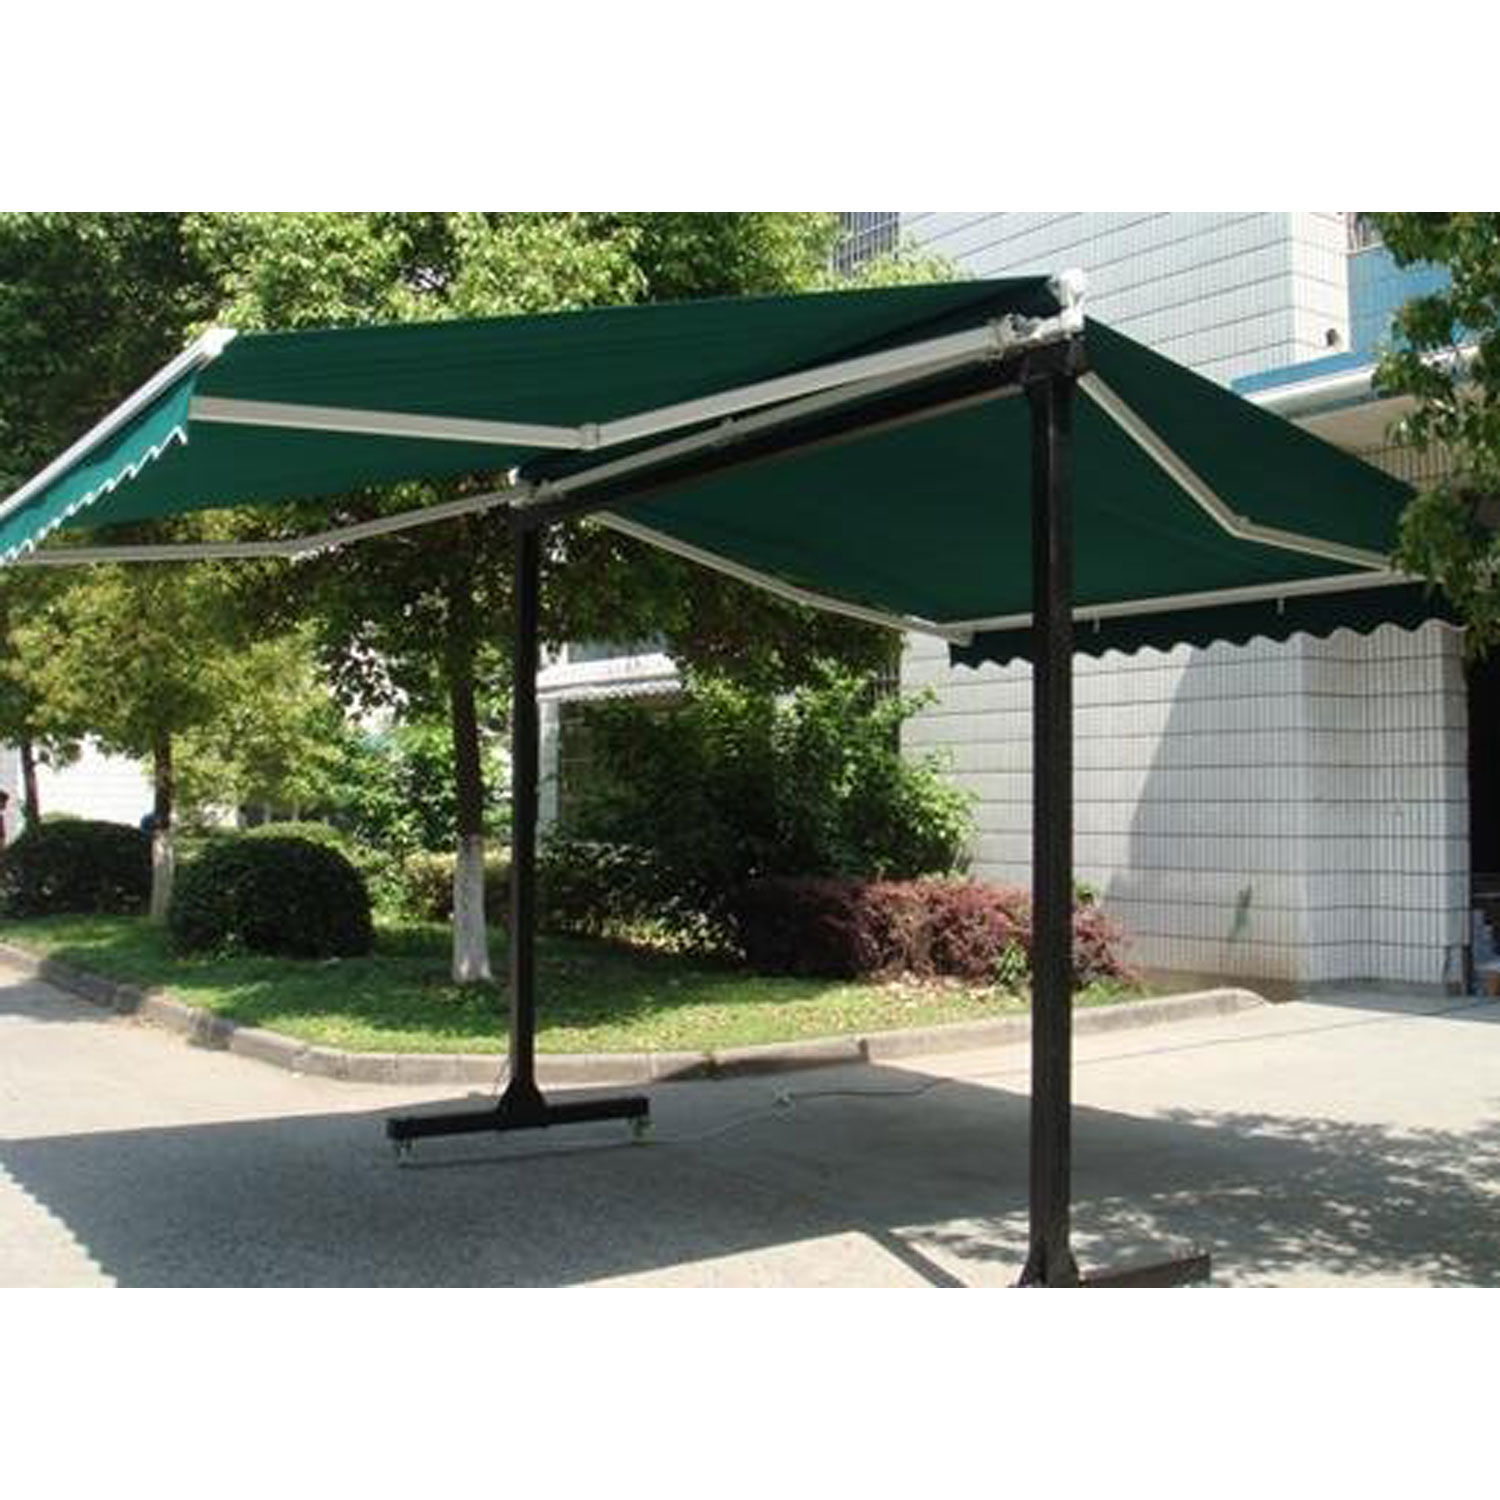 Awntech Retractable Awning Free Standing Manual 14'W x 16'D x 8'H Forest Green 731478949996 eBay